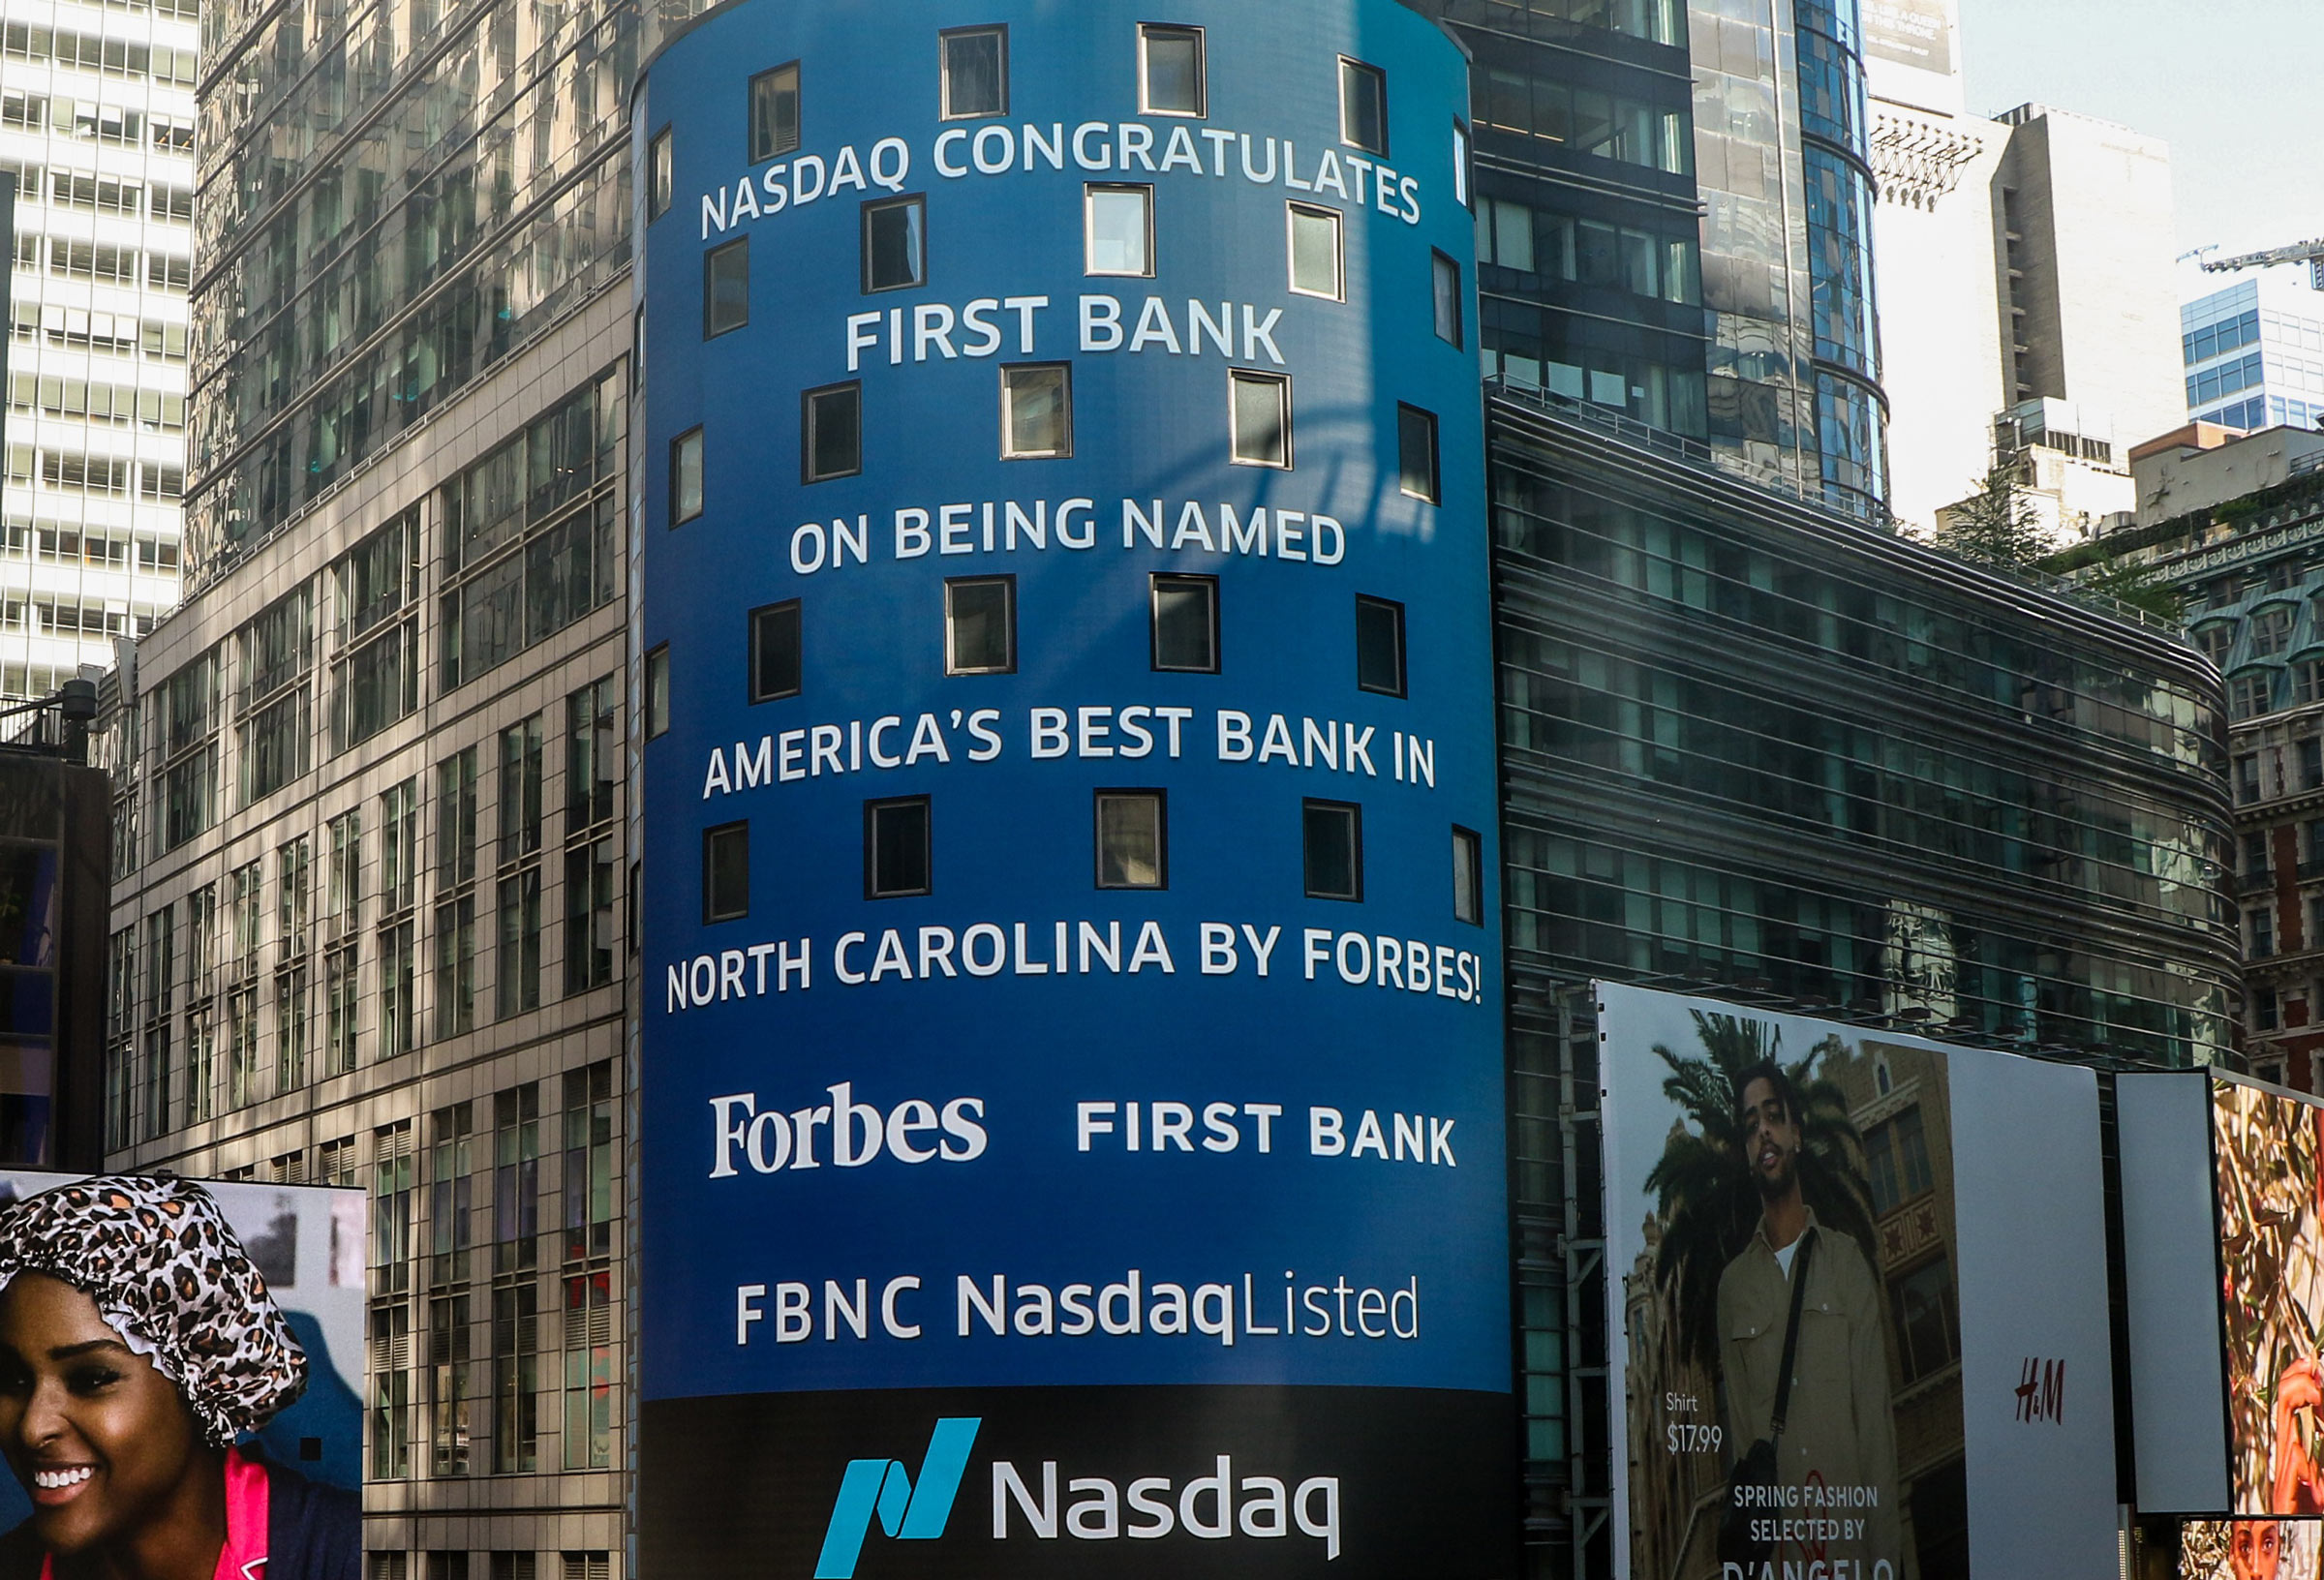 First Bank celebrated the Forbes nod with a marquee in Times Square